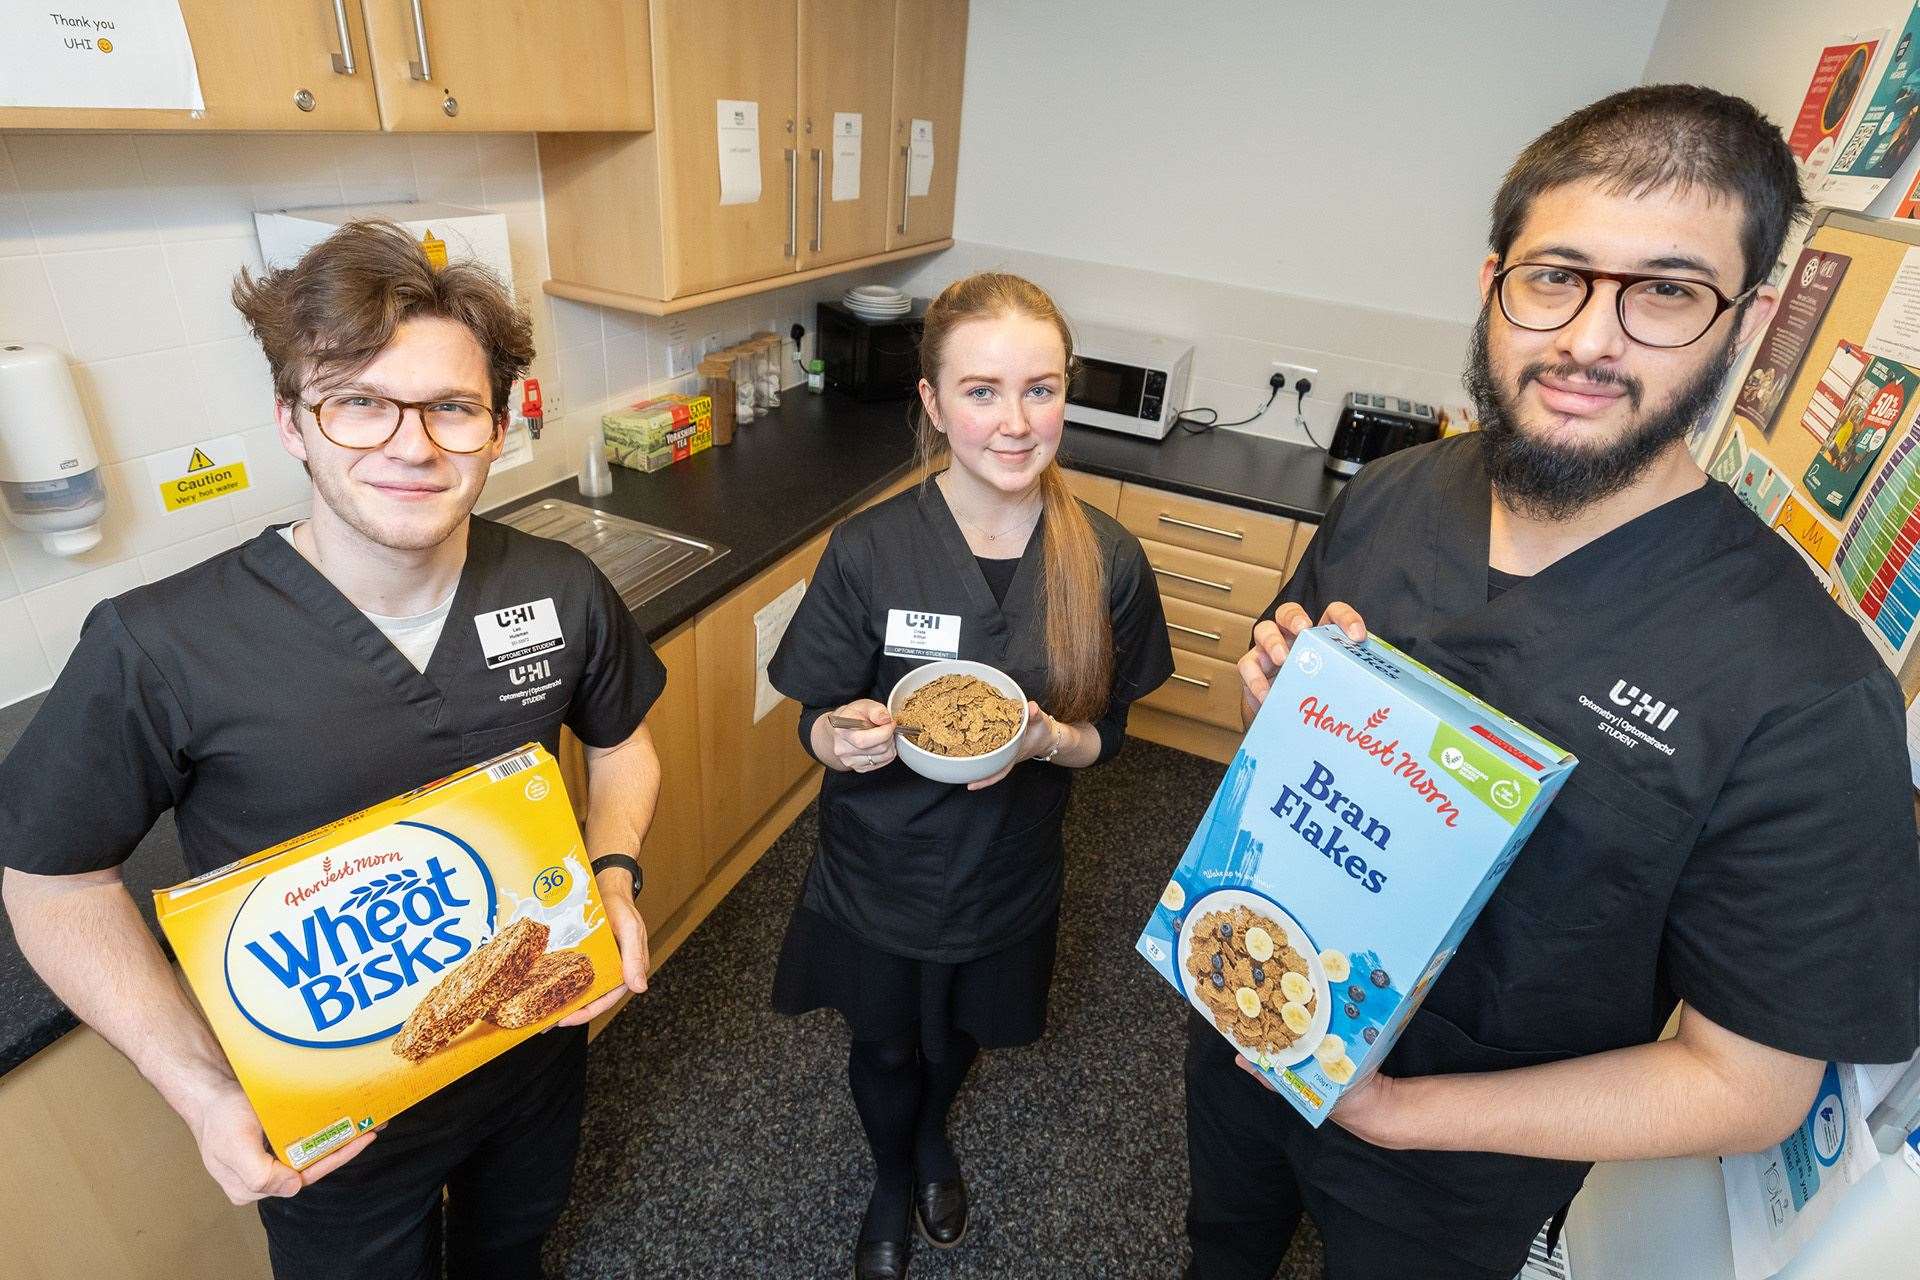 Optometry students Leo Huisman, Crista Arthur and Suad Badshah with breakfast supplies in the student kitchen at UHI House. Picture: Paul Campbell.